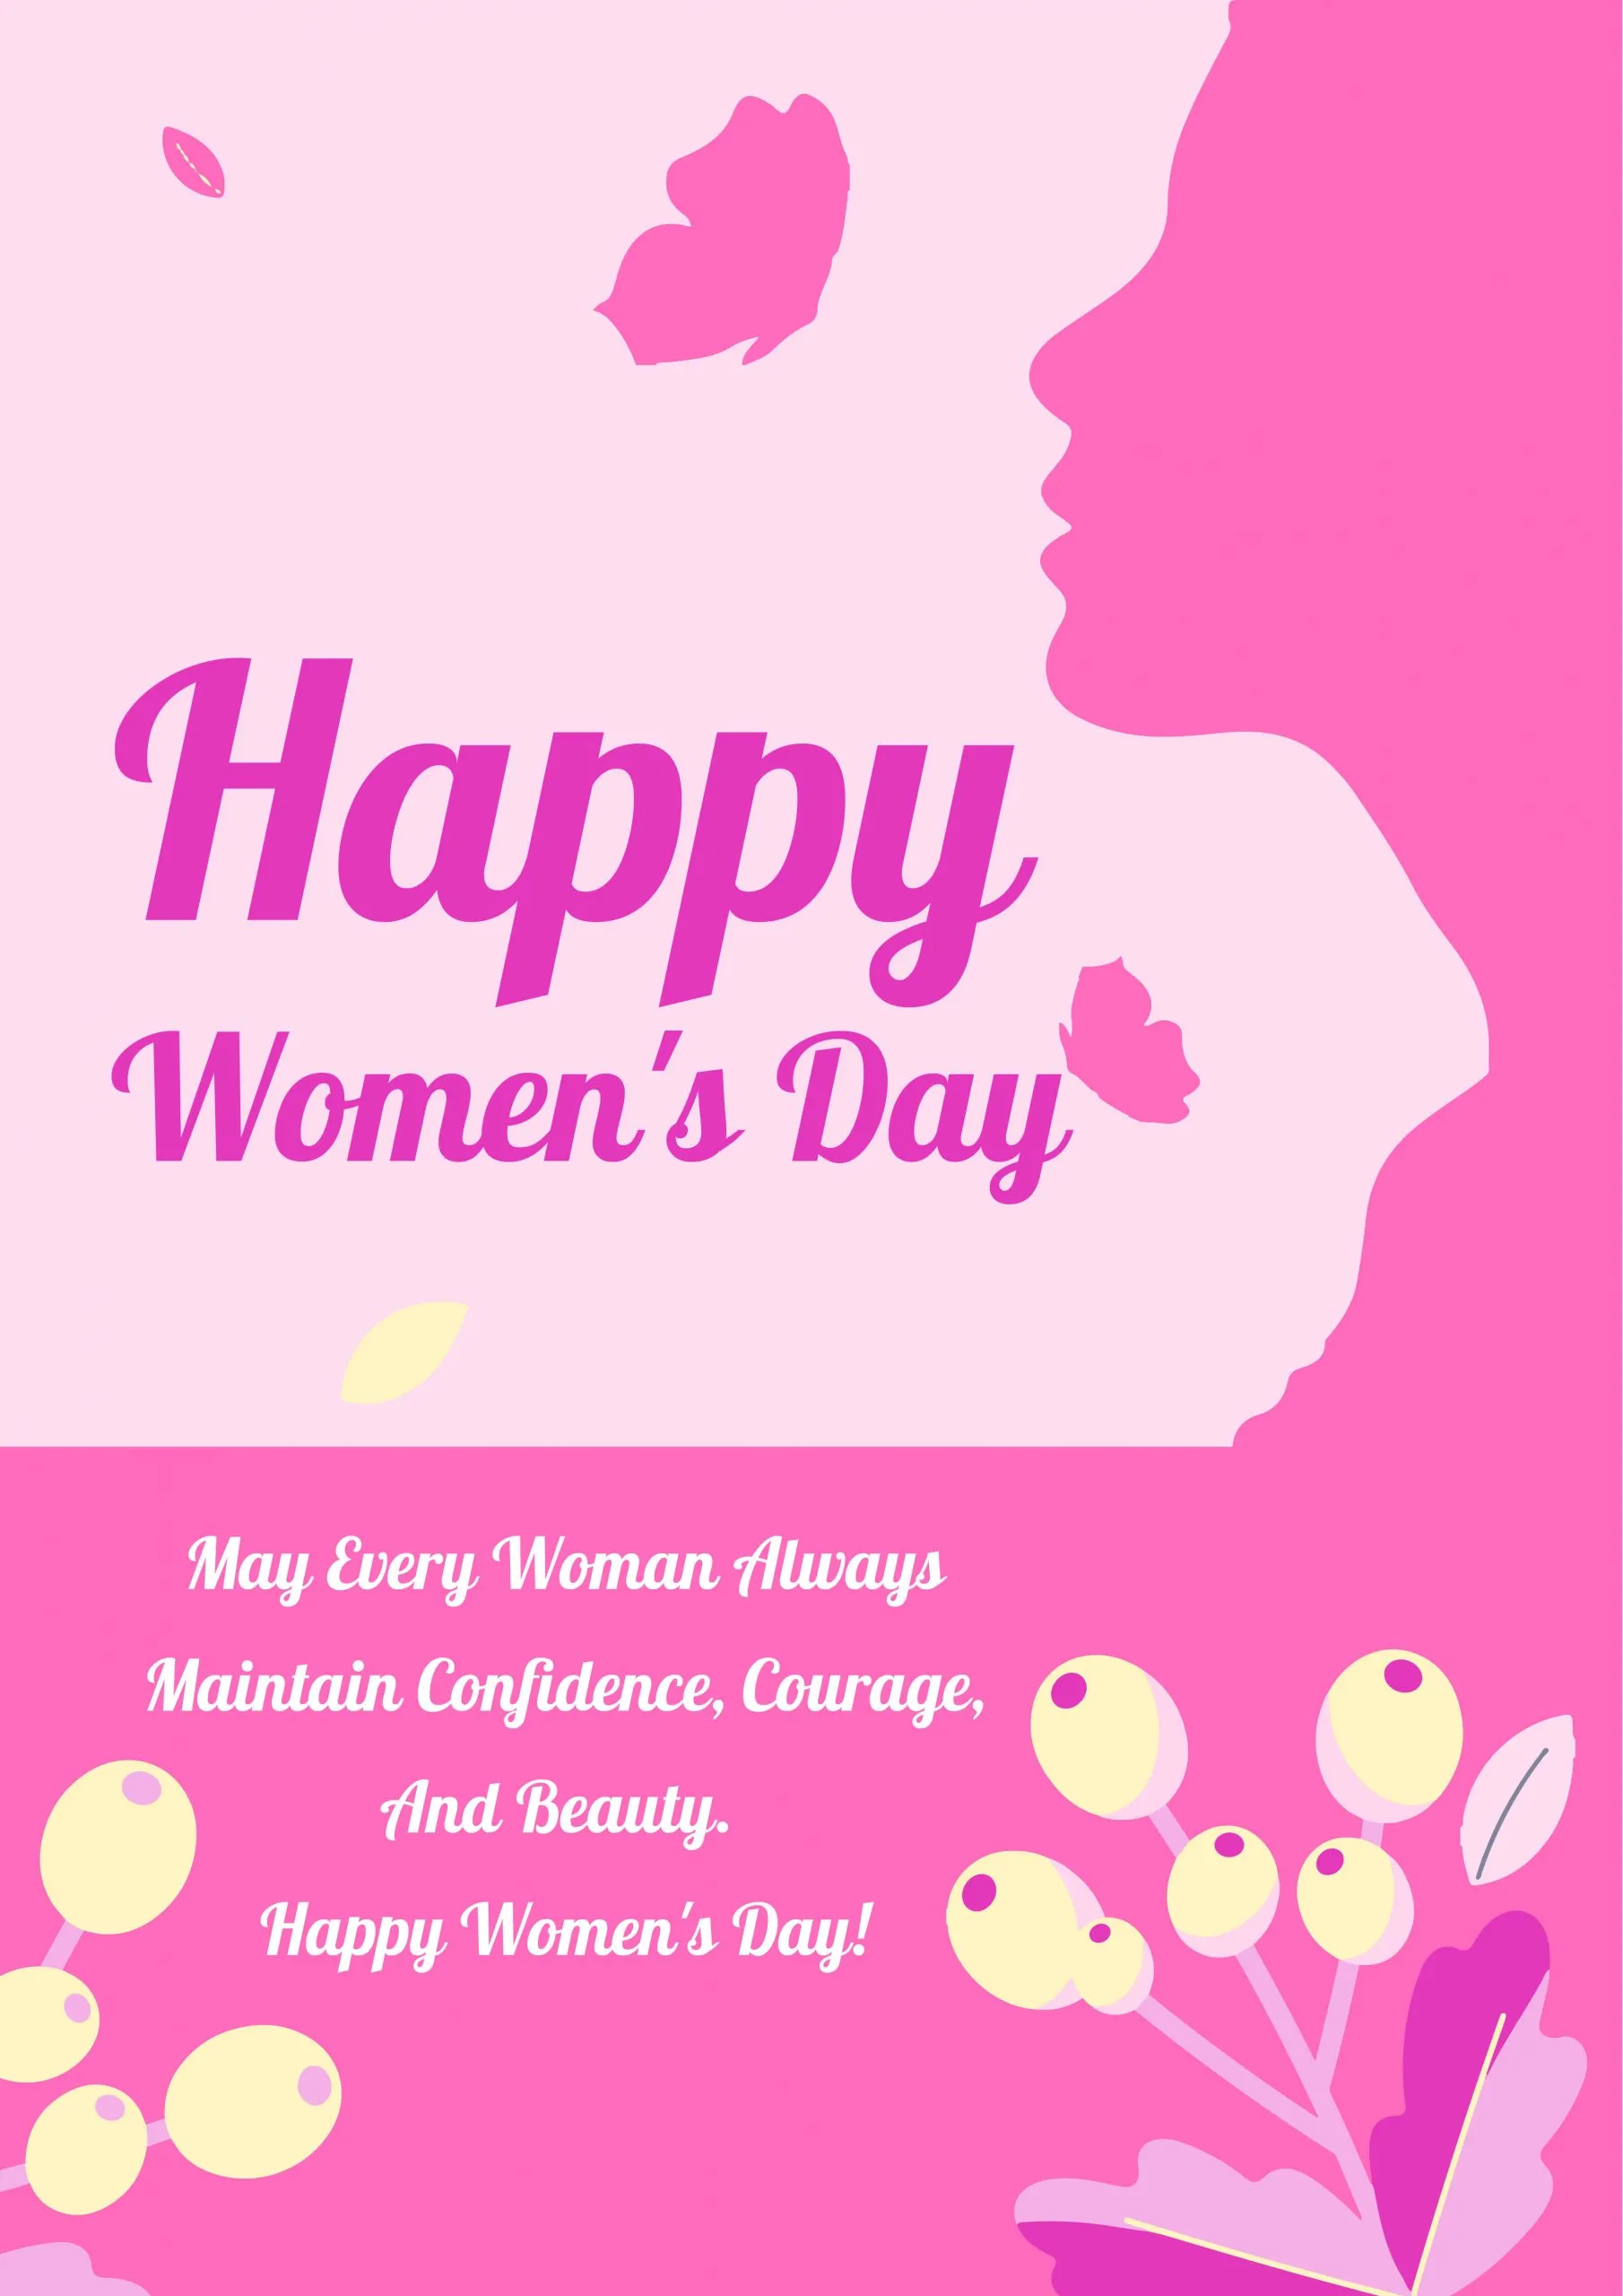 Women's Day Gifts for Employees | Gifts for Employees on Women's Day |  GiftaLove